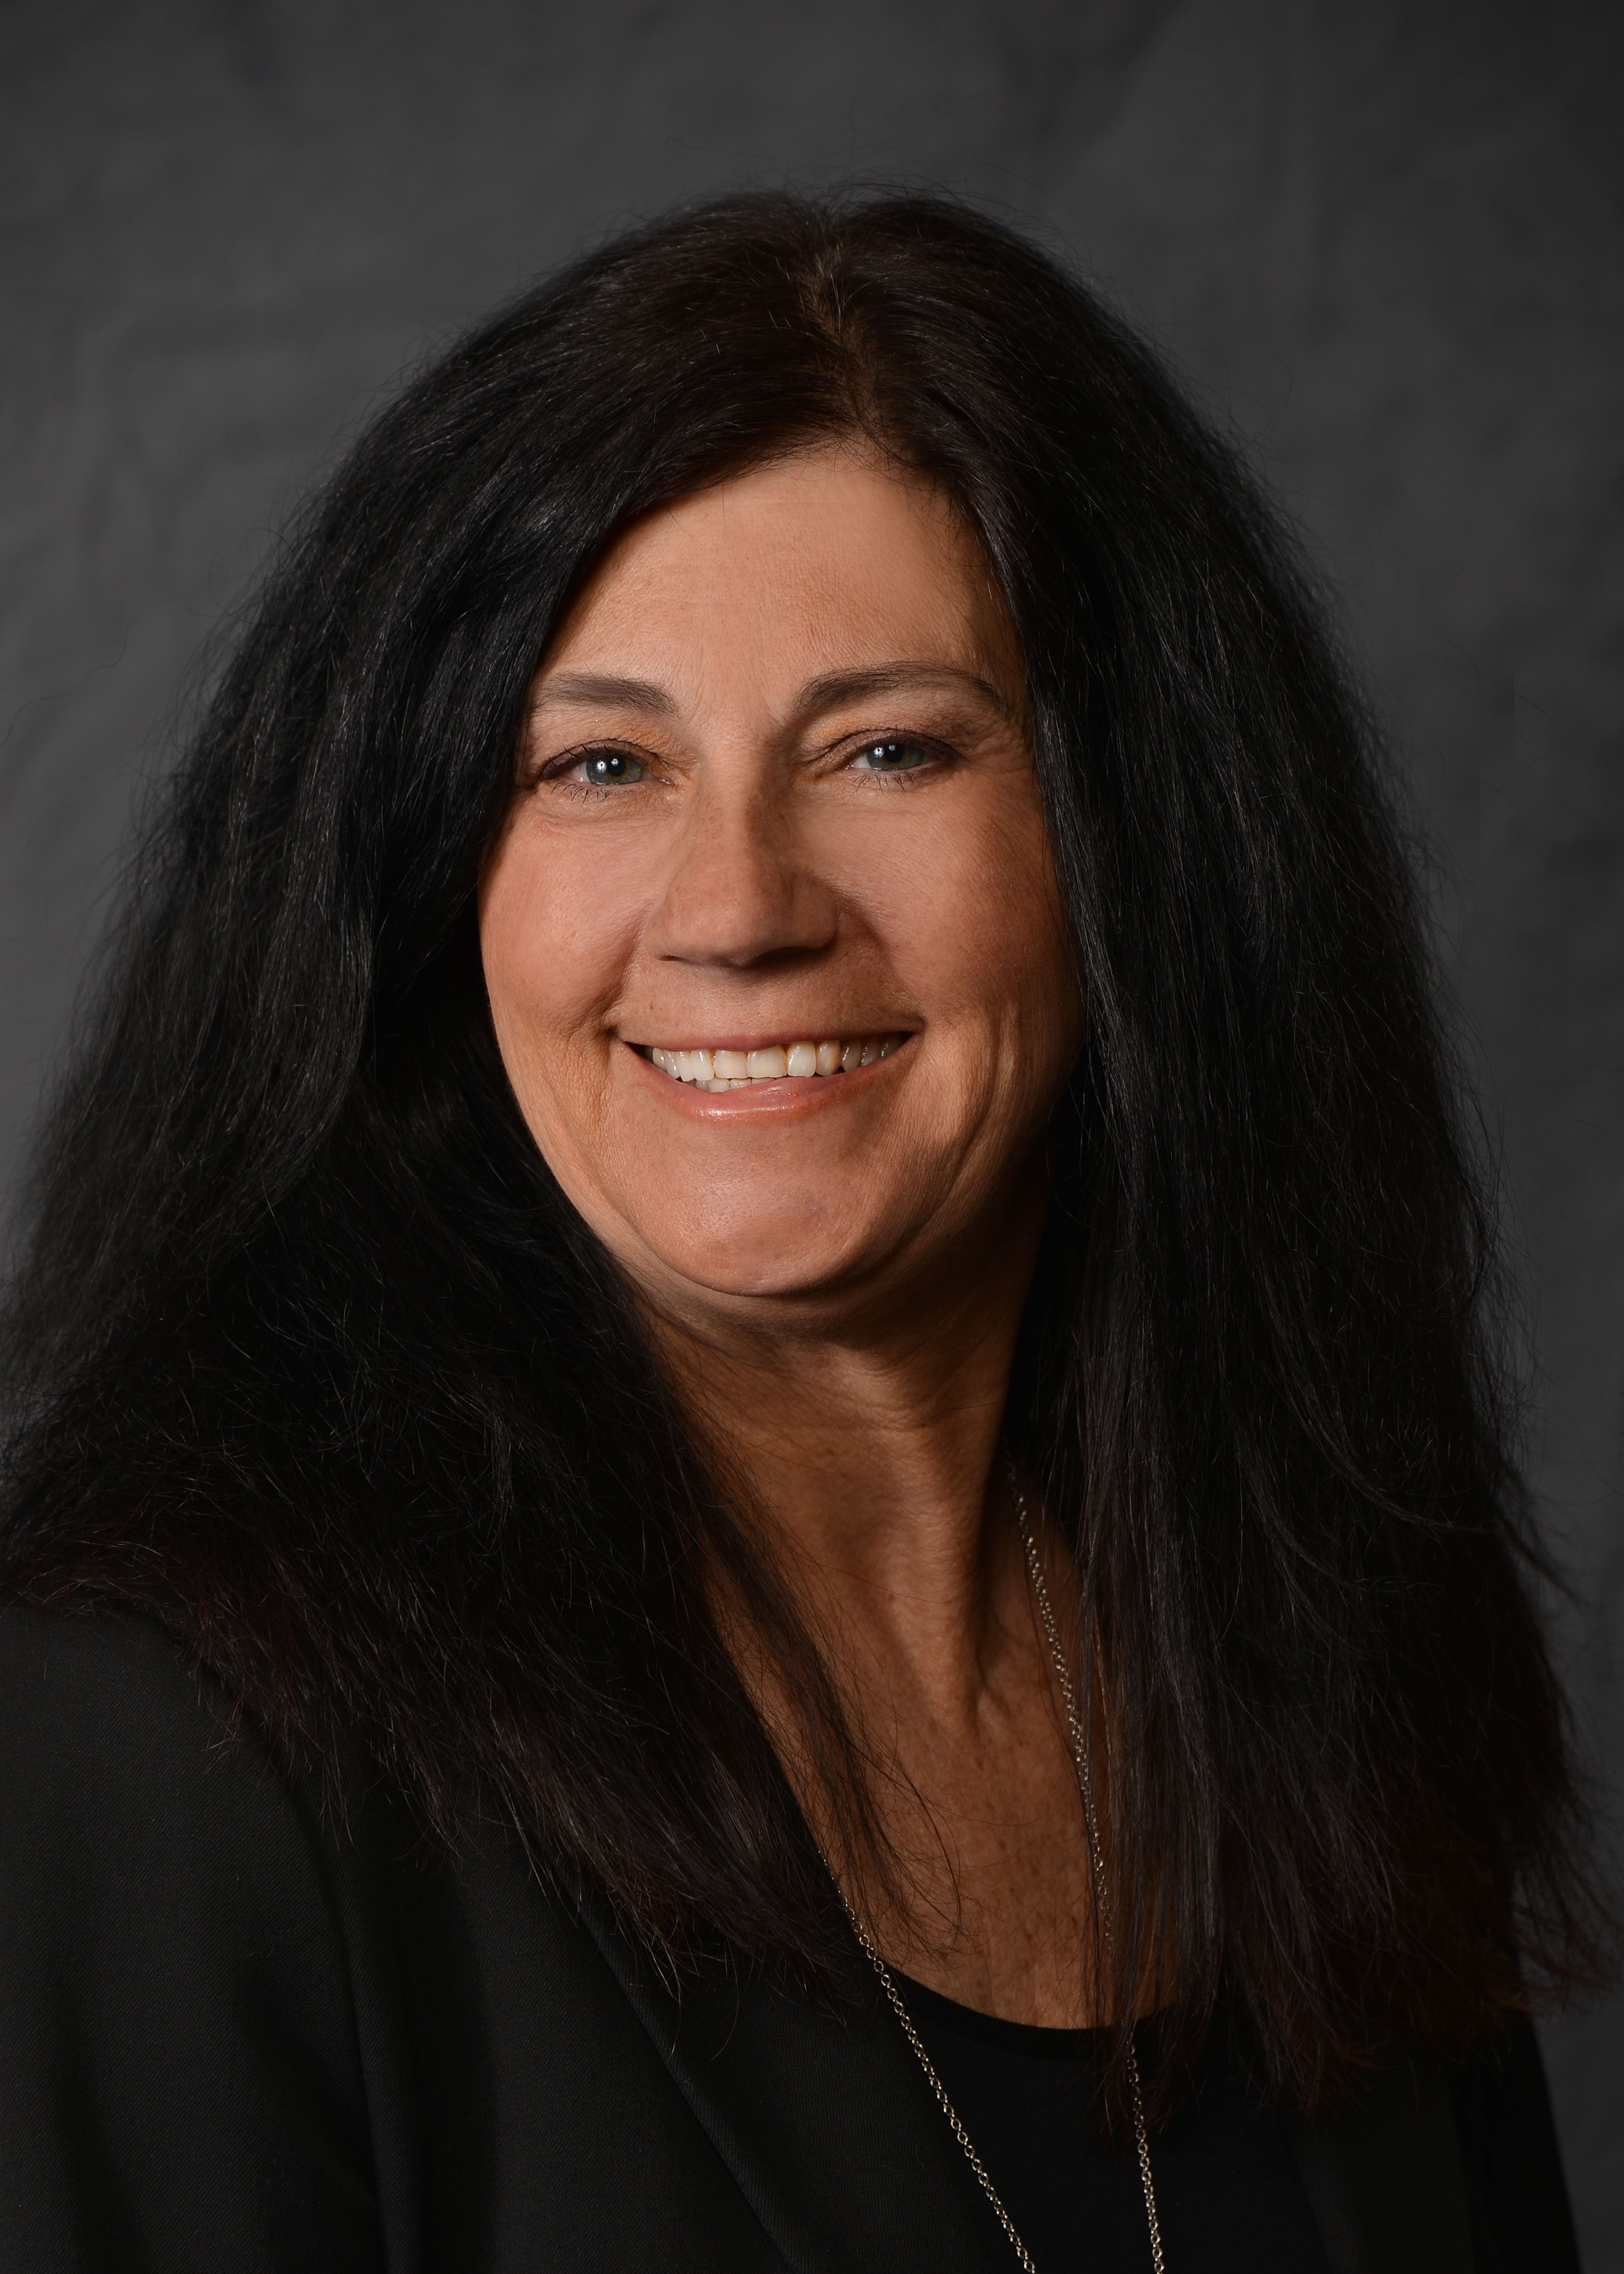 Gina G. Client Care Manager